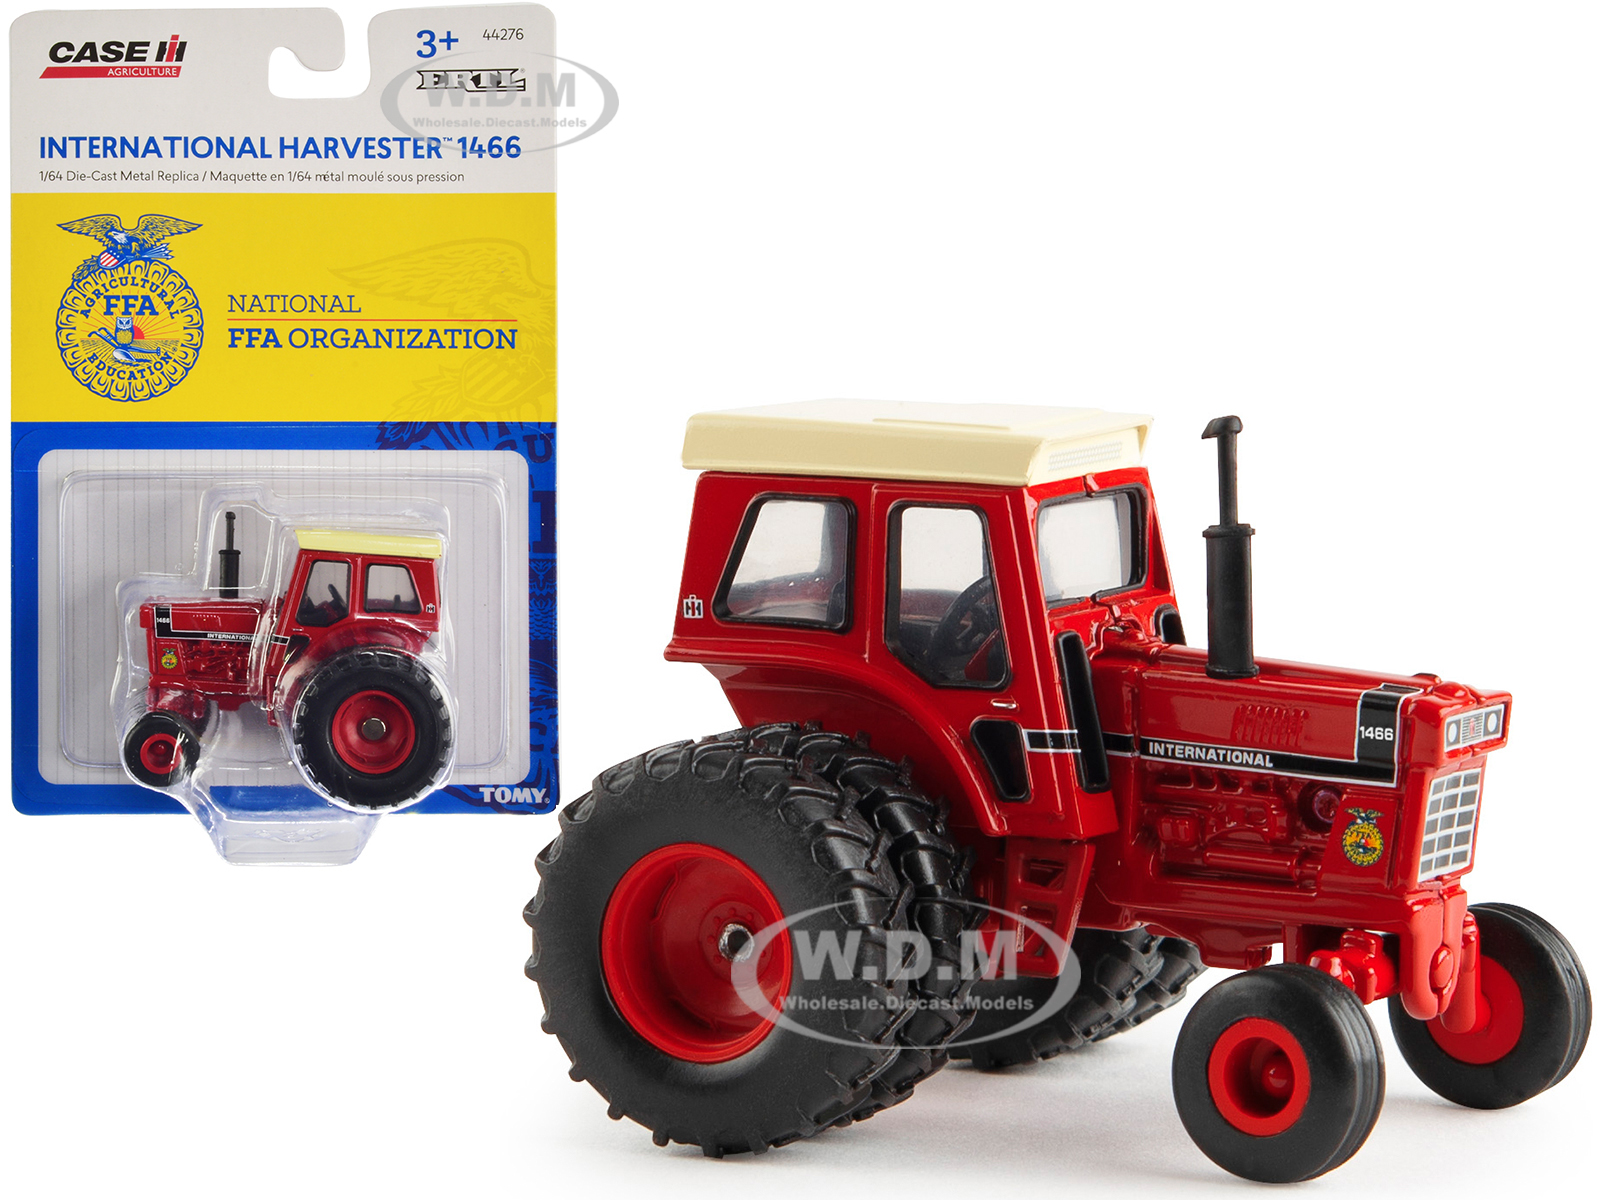 IH International Harvester 1466 Tractor With Dual Wheels Red National FFA Organization Case IH Agriculture 1/64 Diecast Model By ERTL TOMY